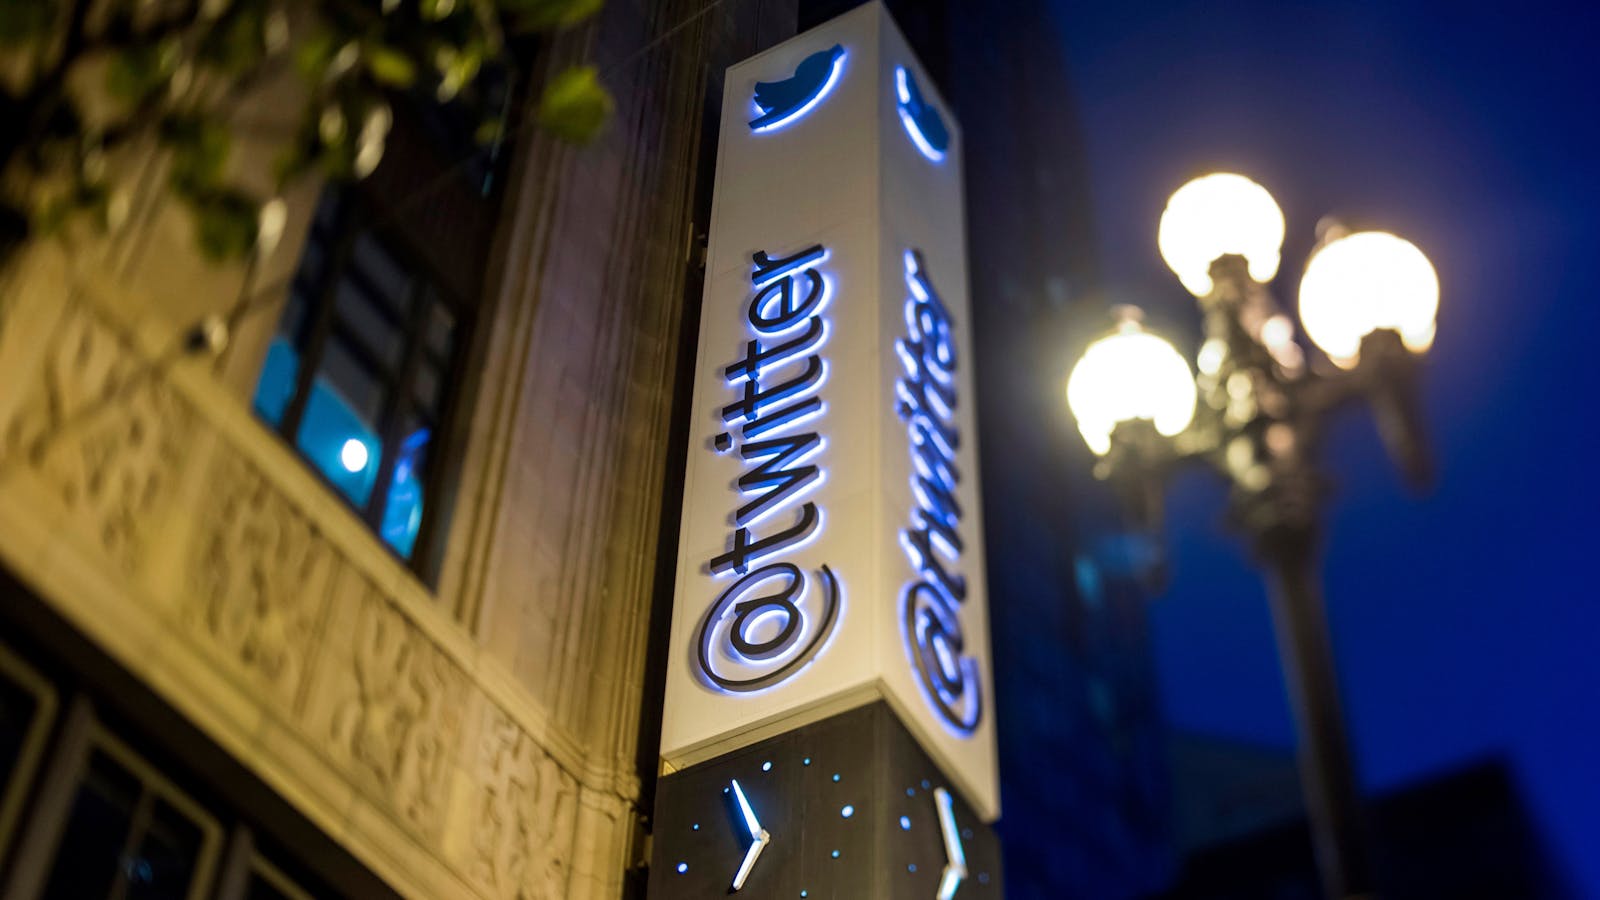 Twitter's San Francisco headquarters. Photo by Bloomberg.